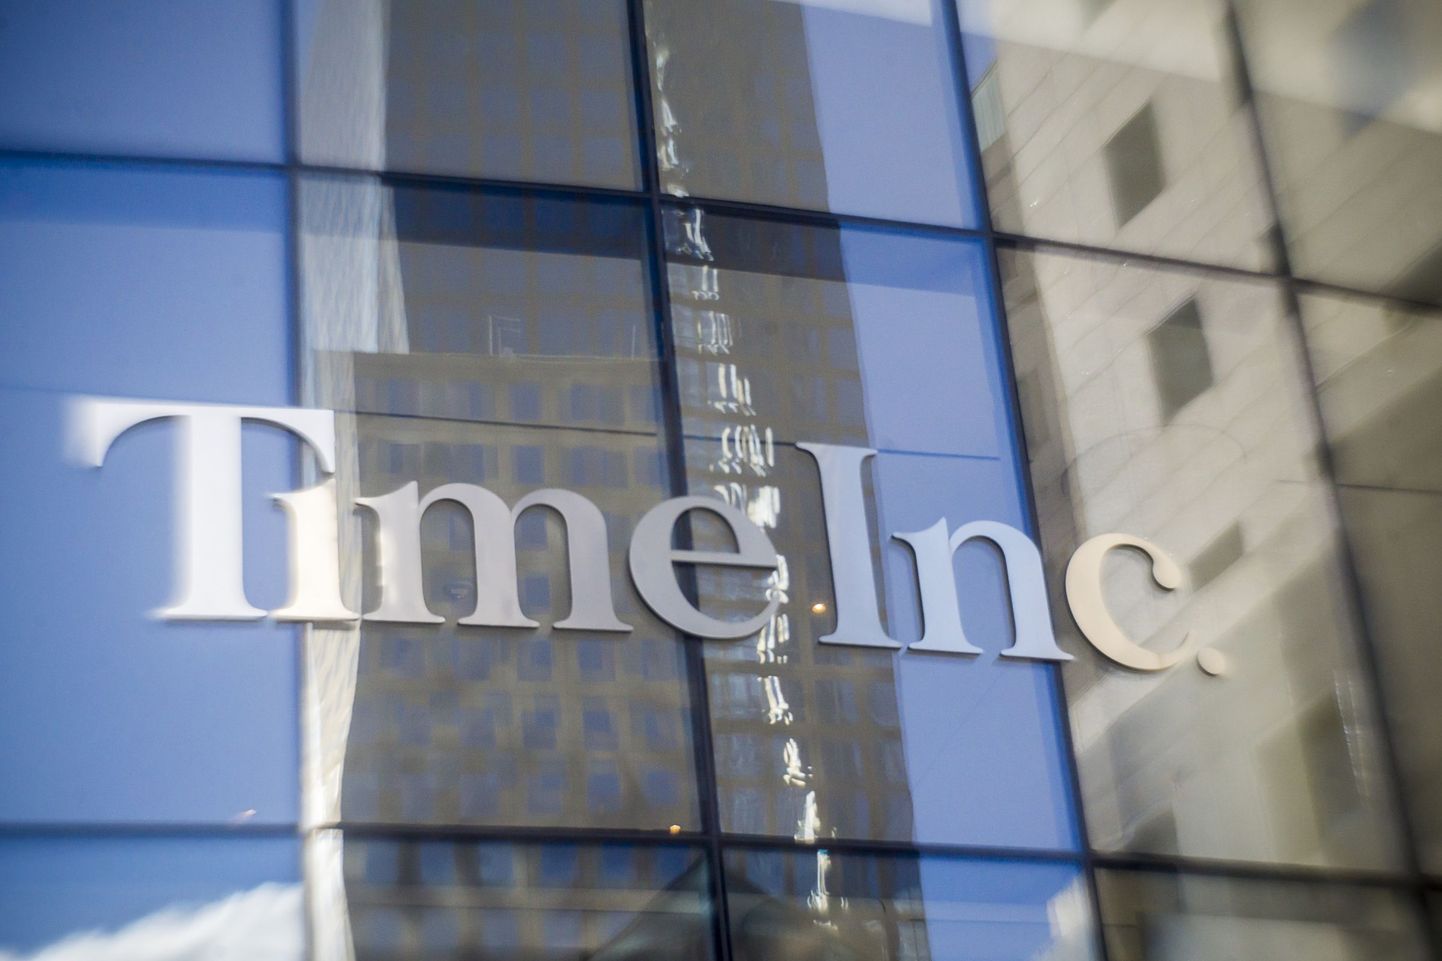 The Time Inc. headquarters in Brookfield Place in Lower Manhattan in New York on Sunday, November 19, 2017. Meredith publishing is reported to making another bid to buy Time Inc. with backing from the billionaire Koch brothers.(Photo by Richard B. Levine)